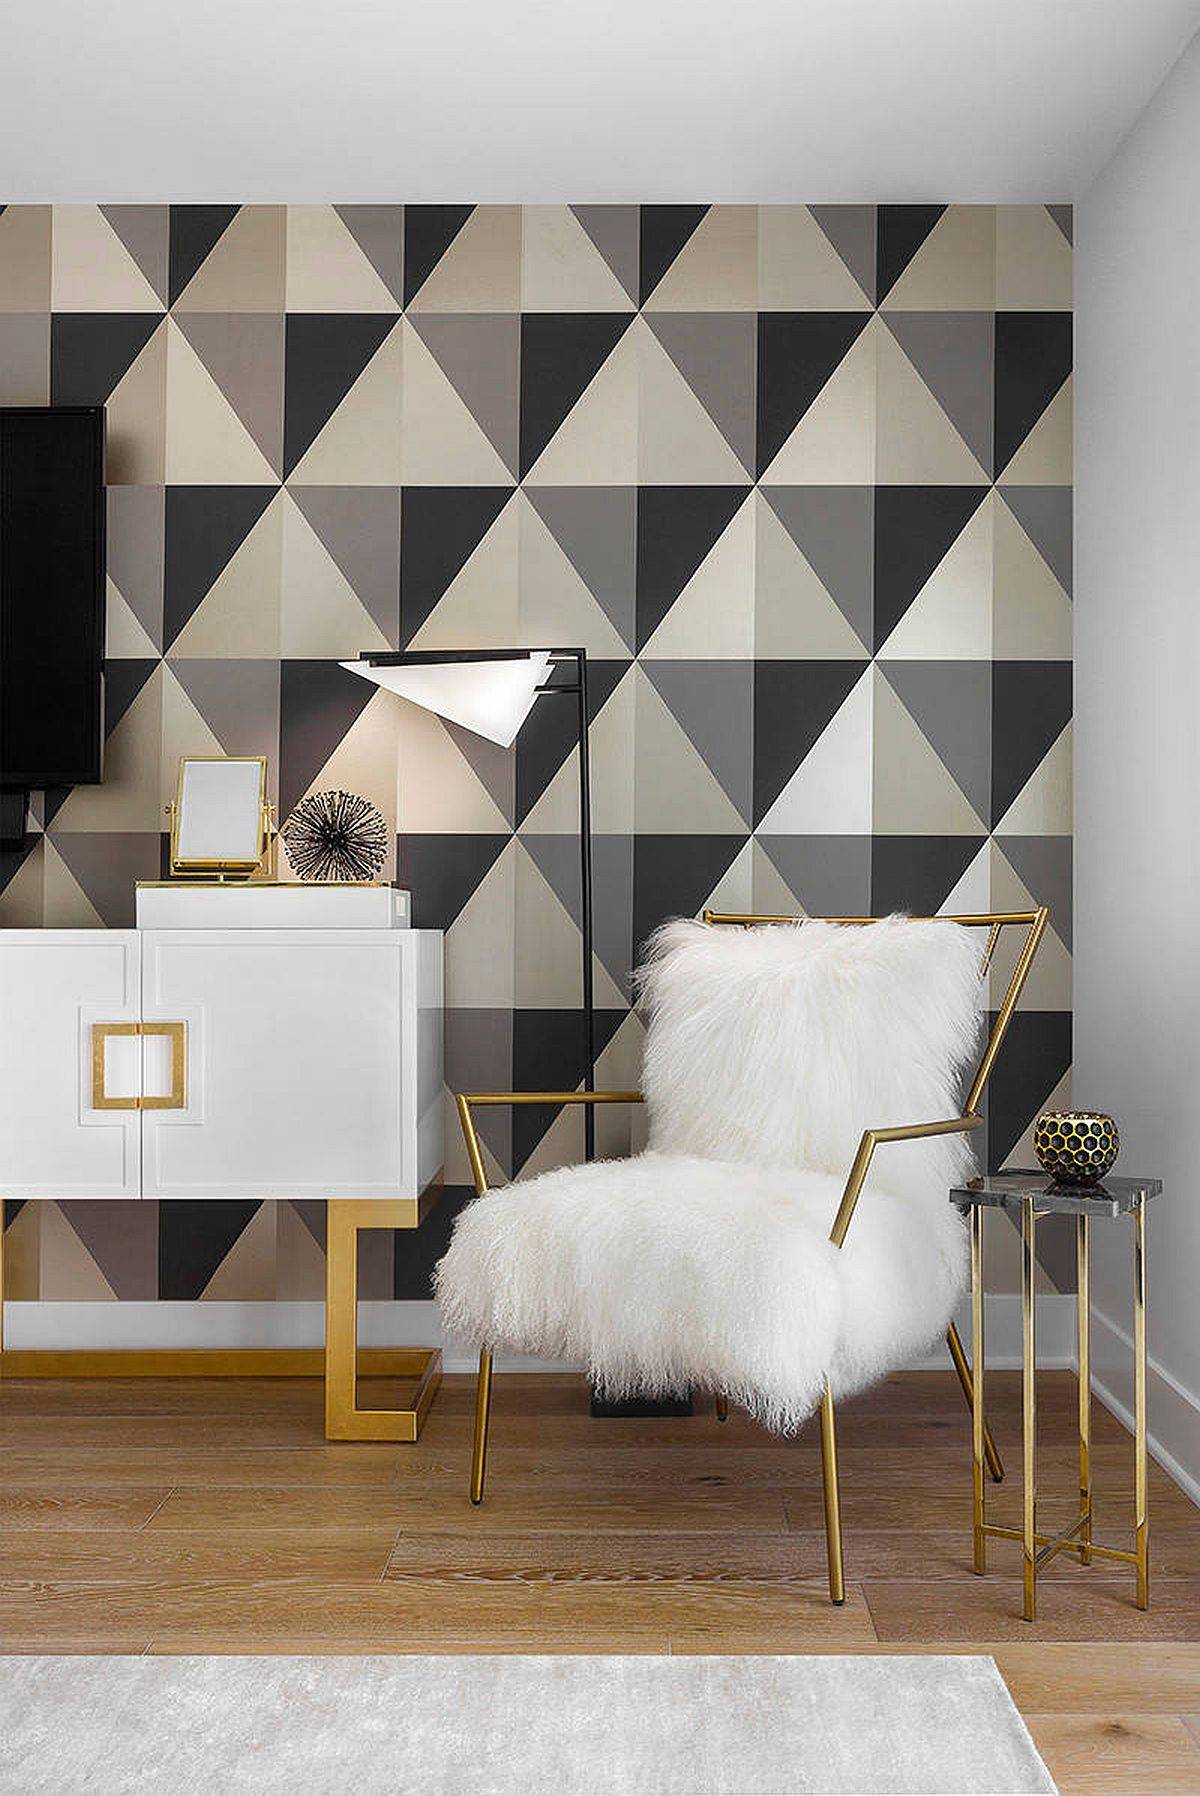 Tranistional bedroom with white, black and gray geometric accent wall and a hint of Hollywood glam